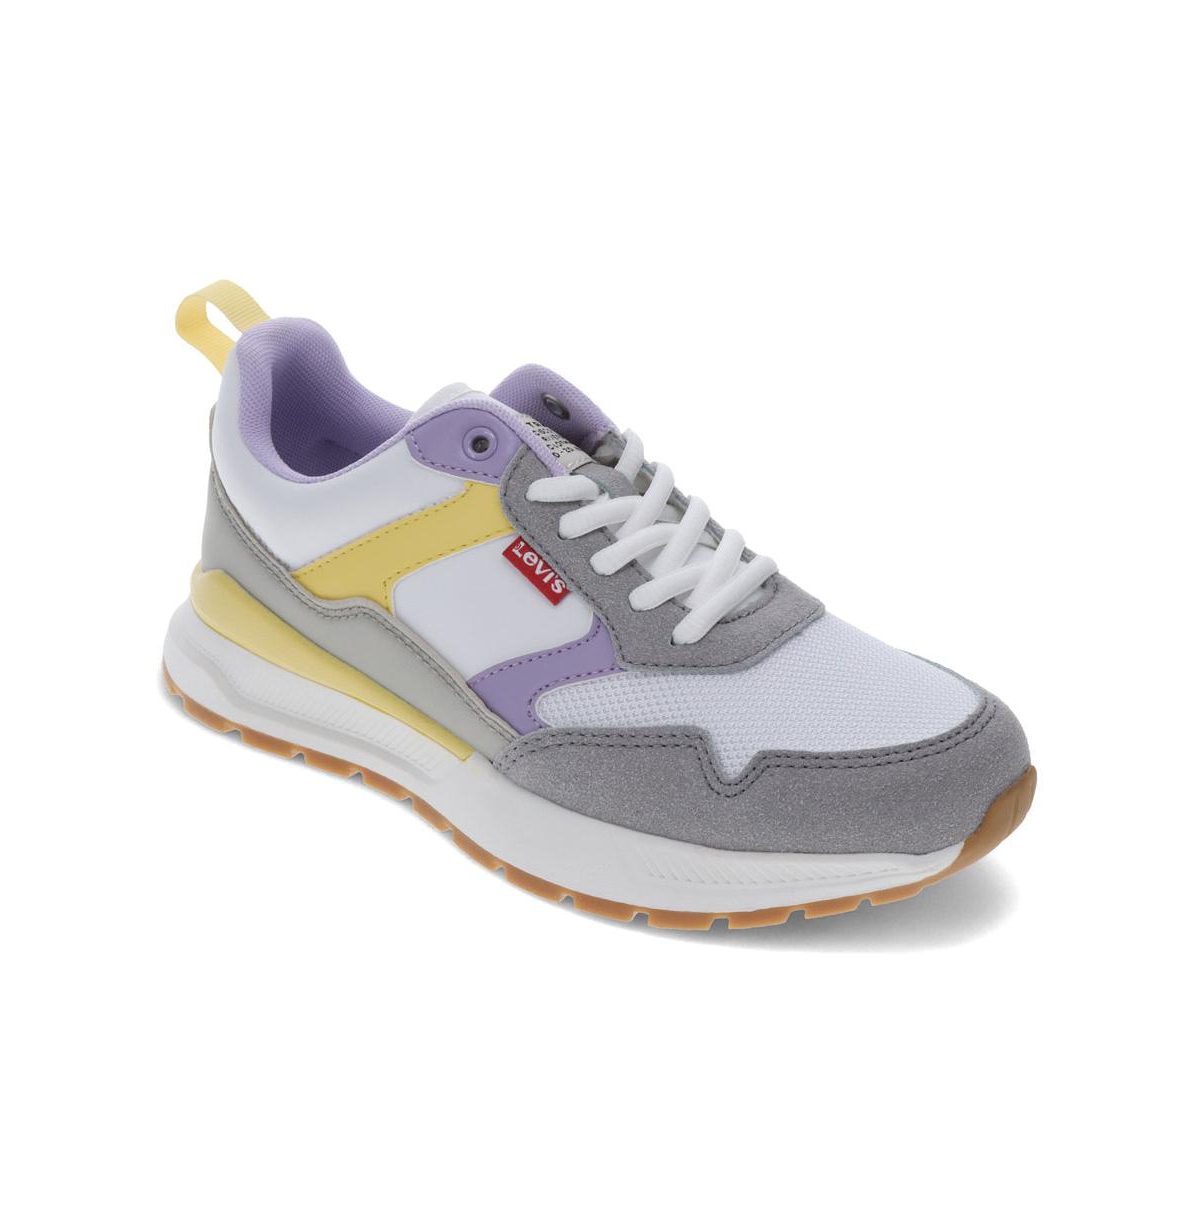 Levi's Women's Oats 2 Synthetic Leather Casual Trainer Sneaker Shoe In White,lilac,sunlight